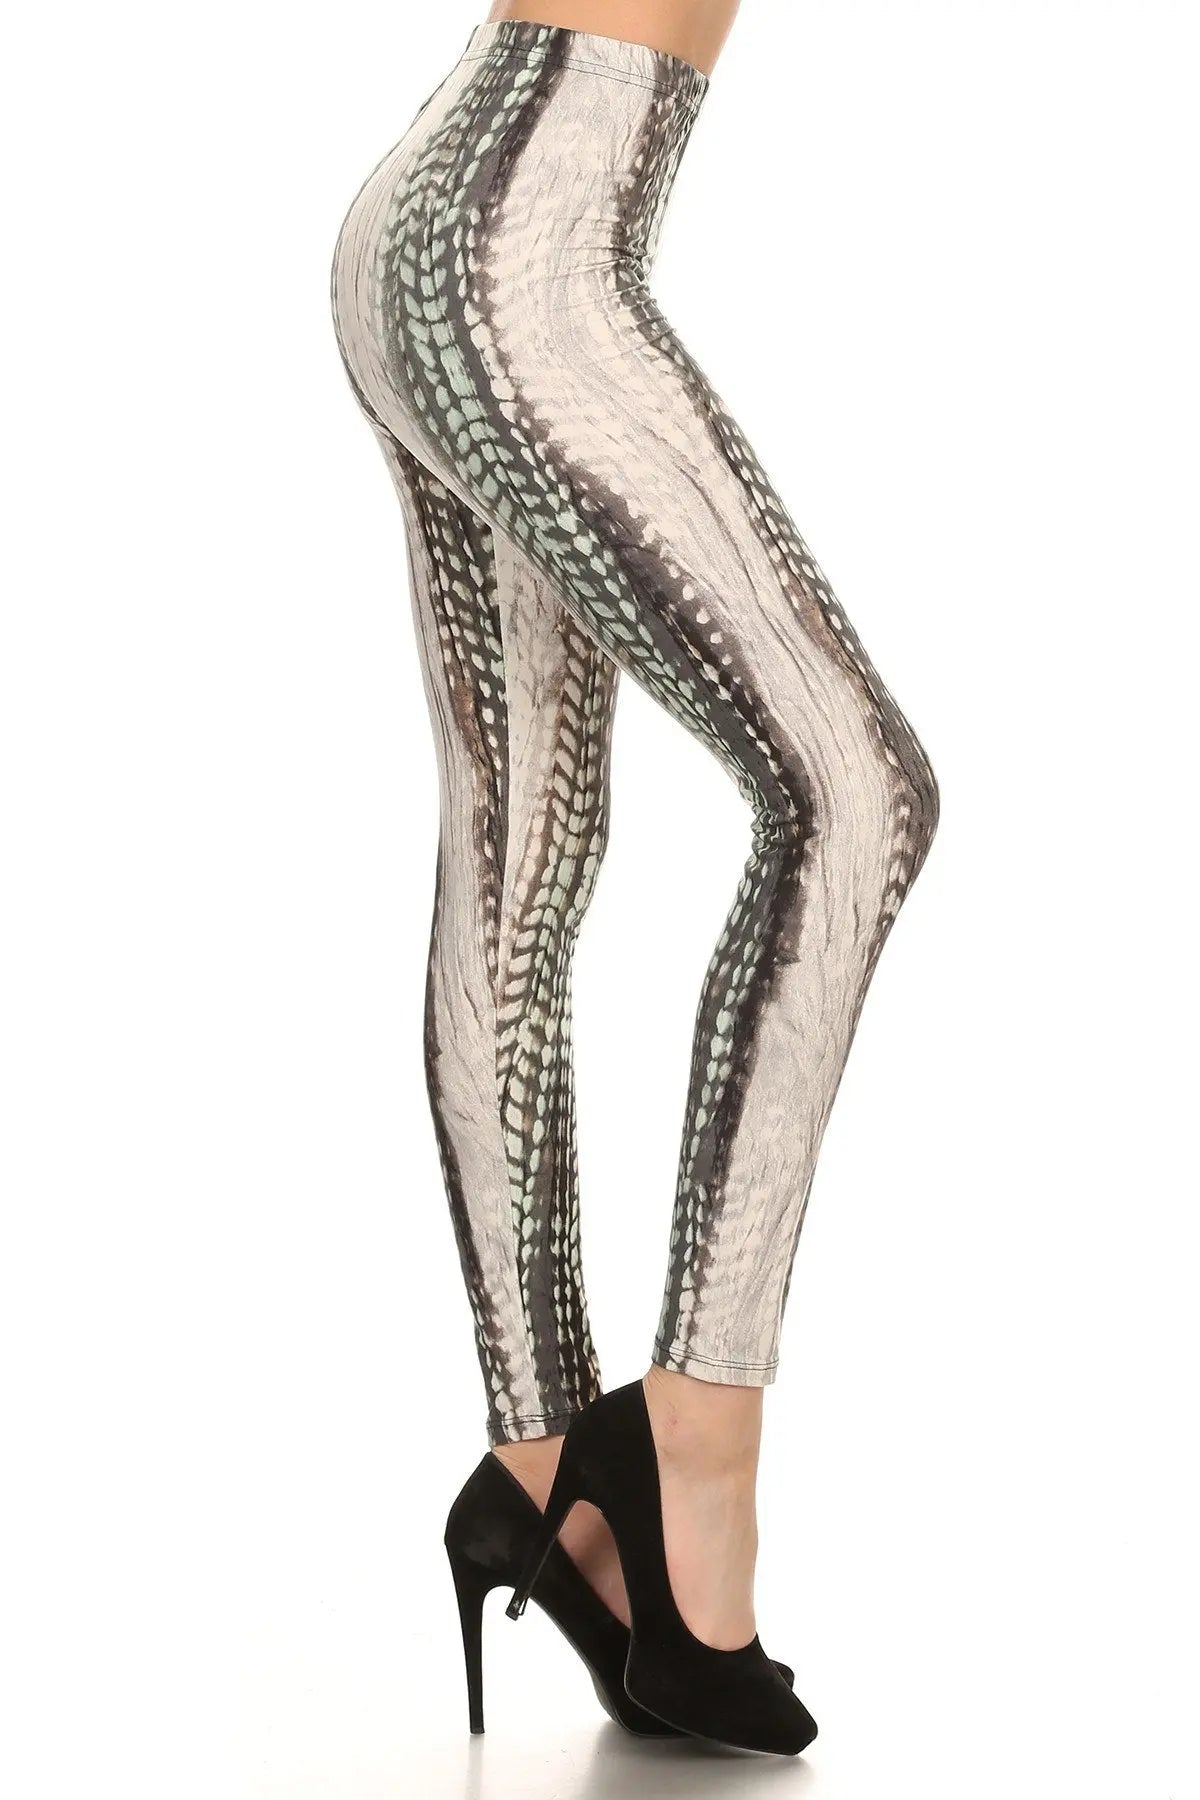 Snake Scales Printed, High Waisted Leggings In Fitted Style With Elastic Waistband Sunny EvE Fashion